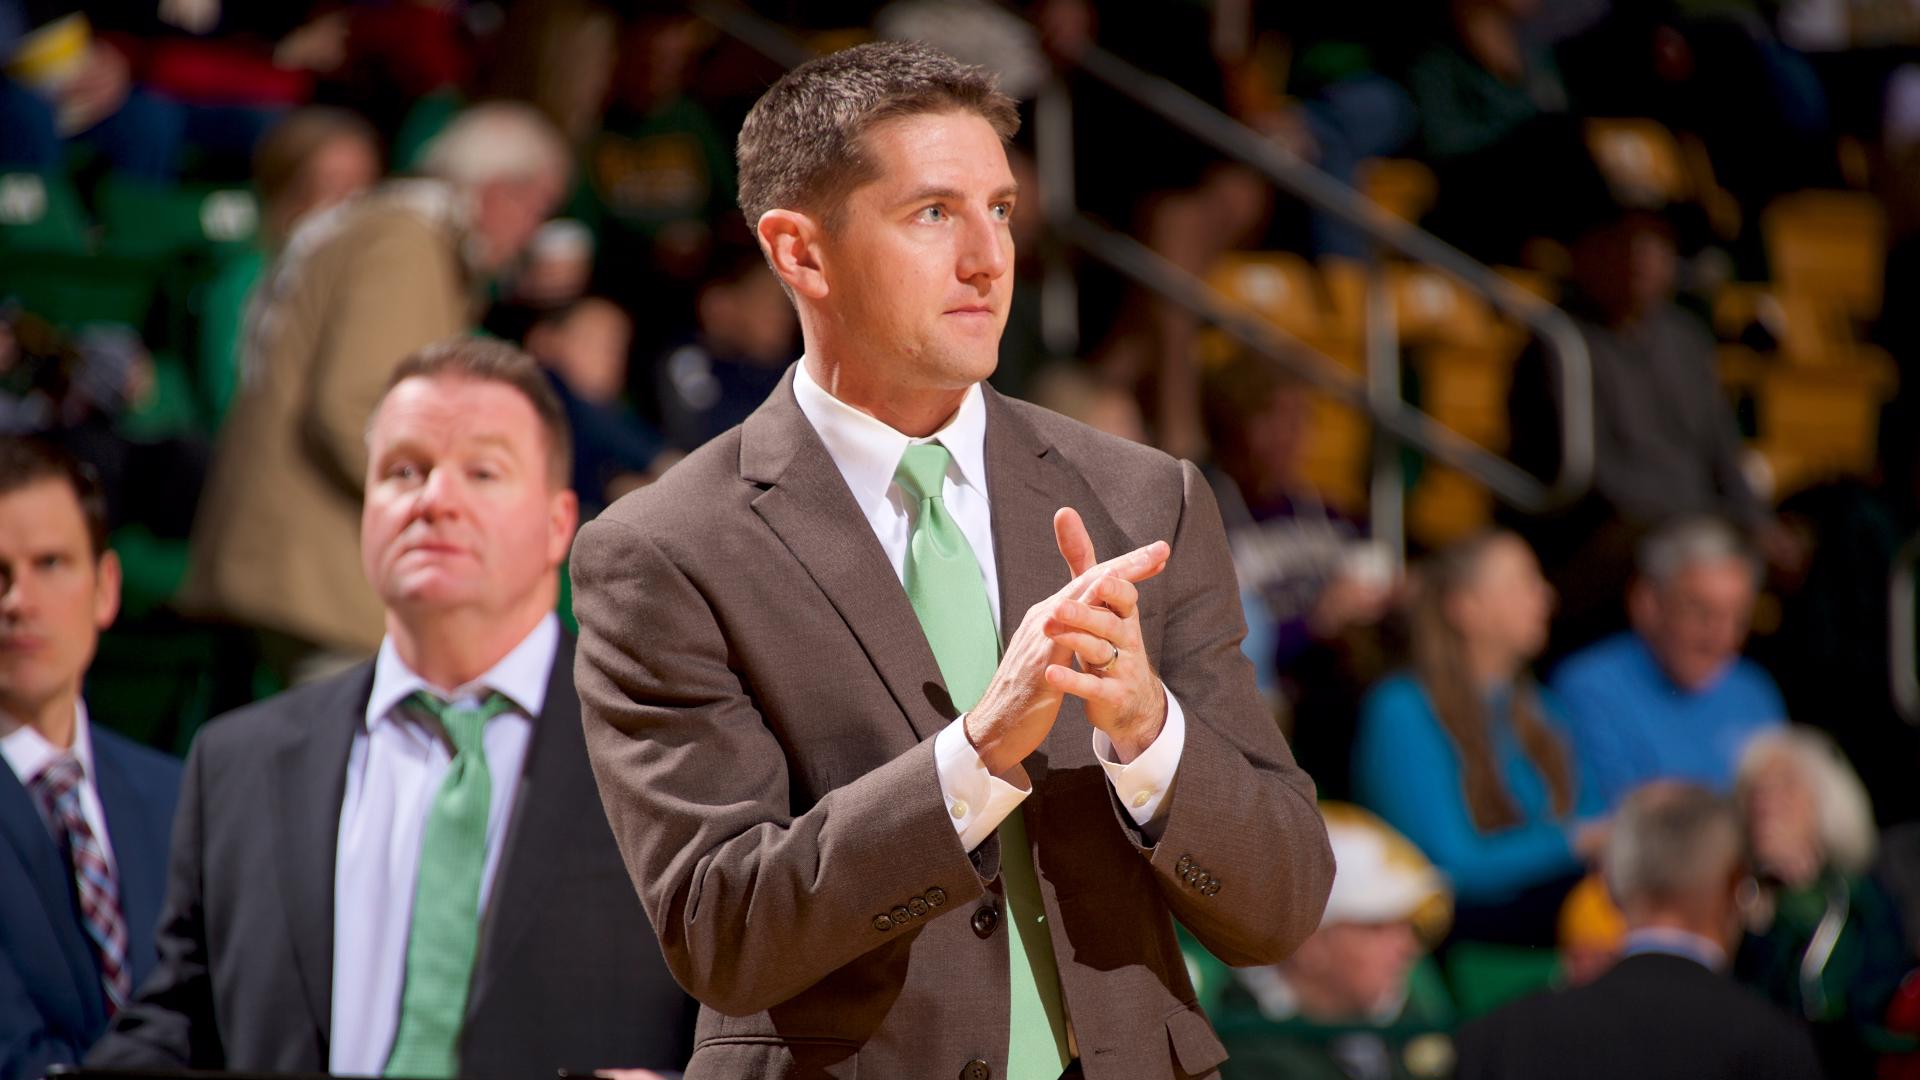 Dane Fischer's most recent stop was at George Mason where he was an assistant the past 4 years.